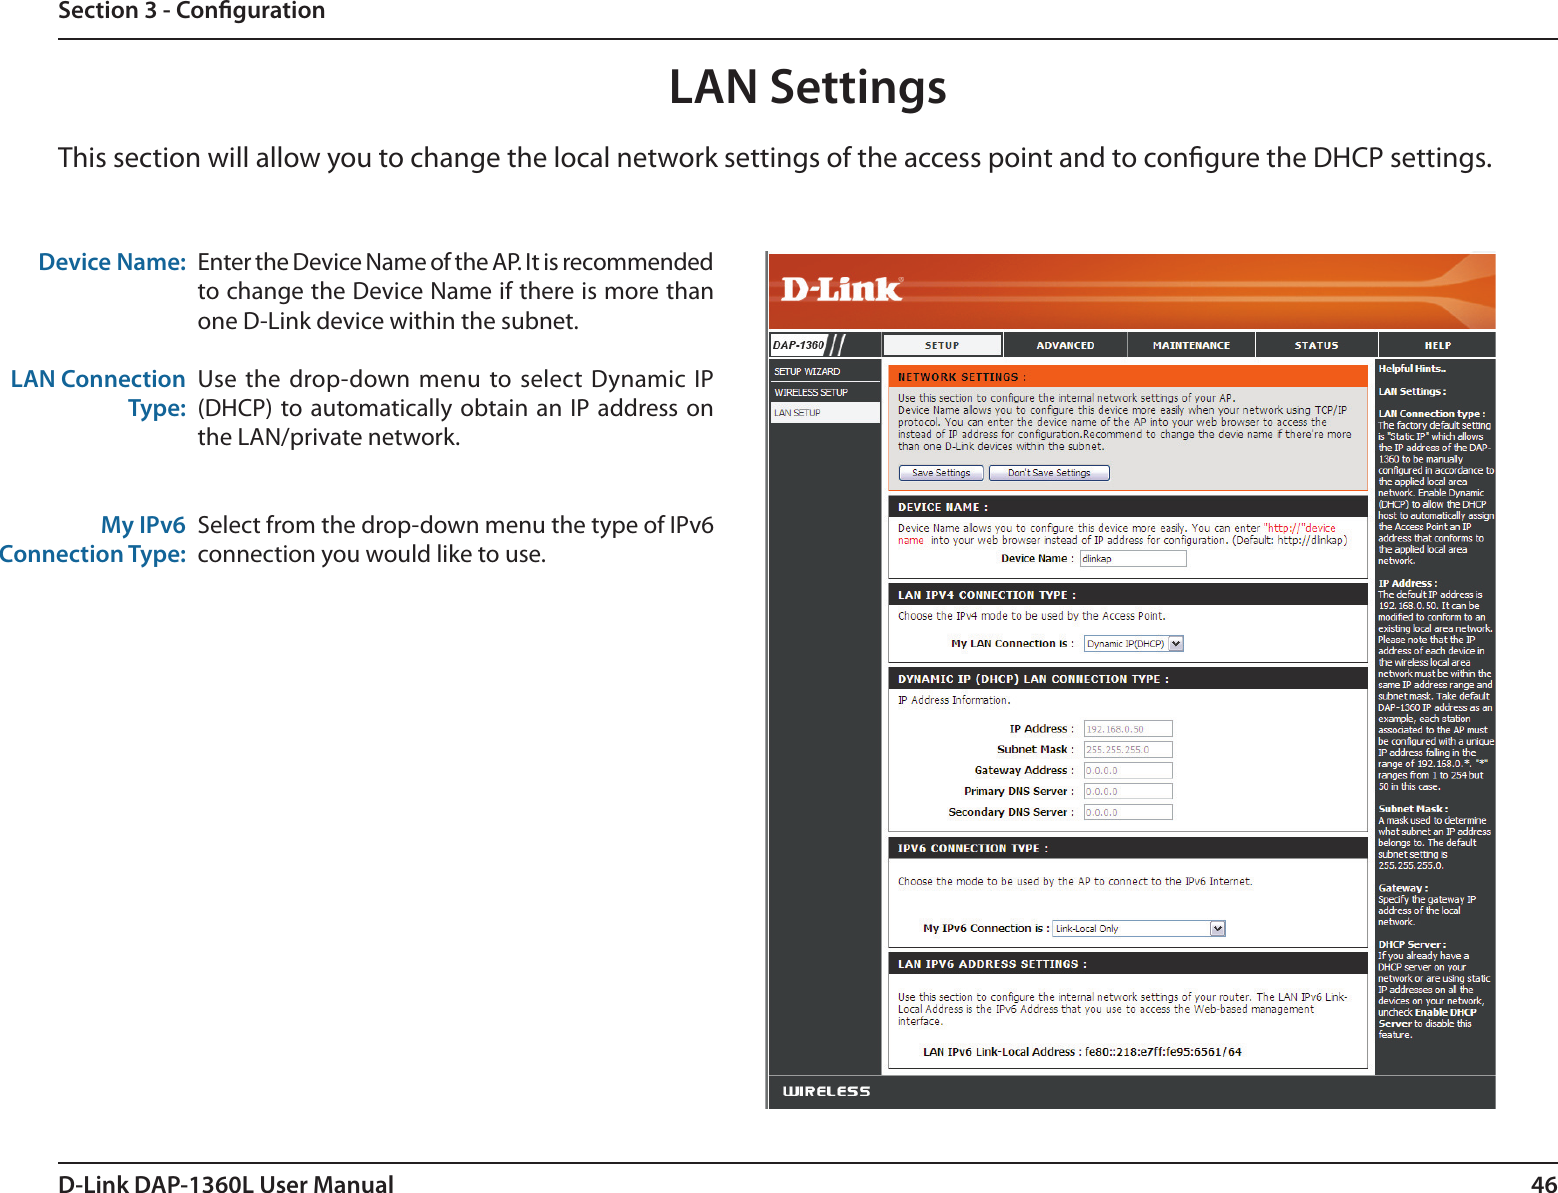 46D-Link DAP-1360L User ManualSection 3 - CongurationLAN SettingsThis section will allow you to change the local network settings of the access point and to congure the DHCP settings.Device Name:LAN Connection Type:My IPv6 Connection Type:Enter the Device Name of the AP. It is recommended to change the Device Name if there is more than one D-Link device within the subnet.Use  the  drop-down  menu  to select Dynamic  IP (DHCP) to automatically obtain an  IP address on the LAN/private network.Select from the drop-down menu the type of IPv6 connection you would like to use. 